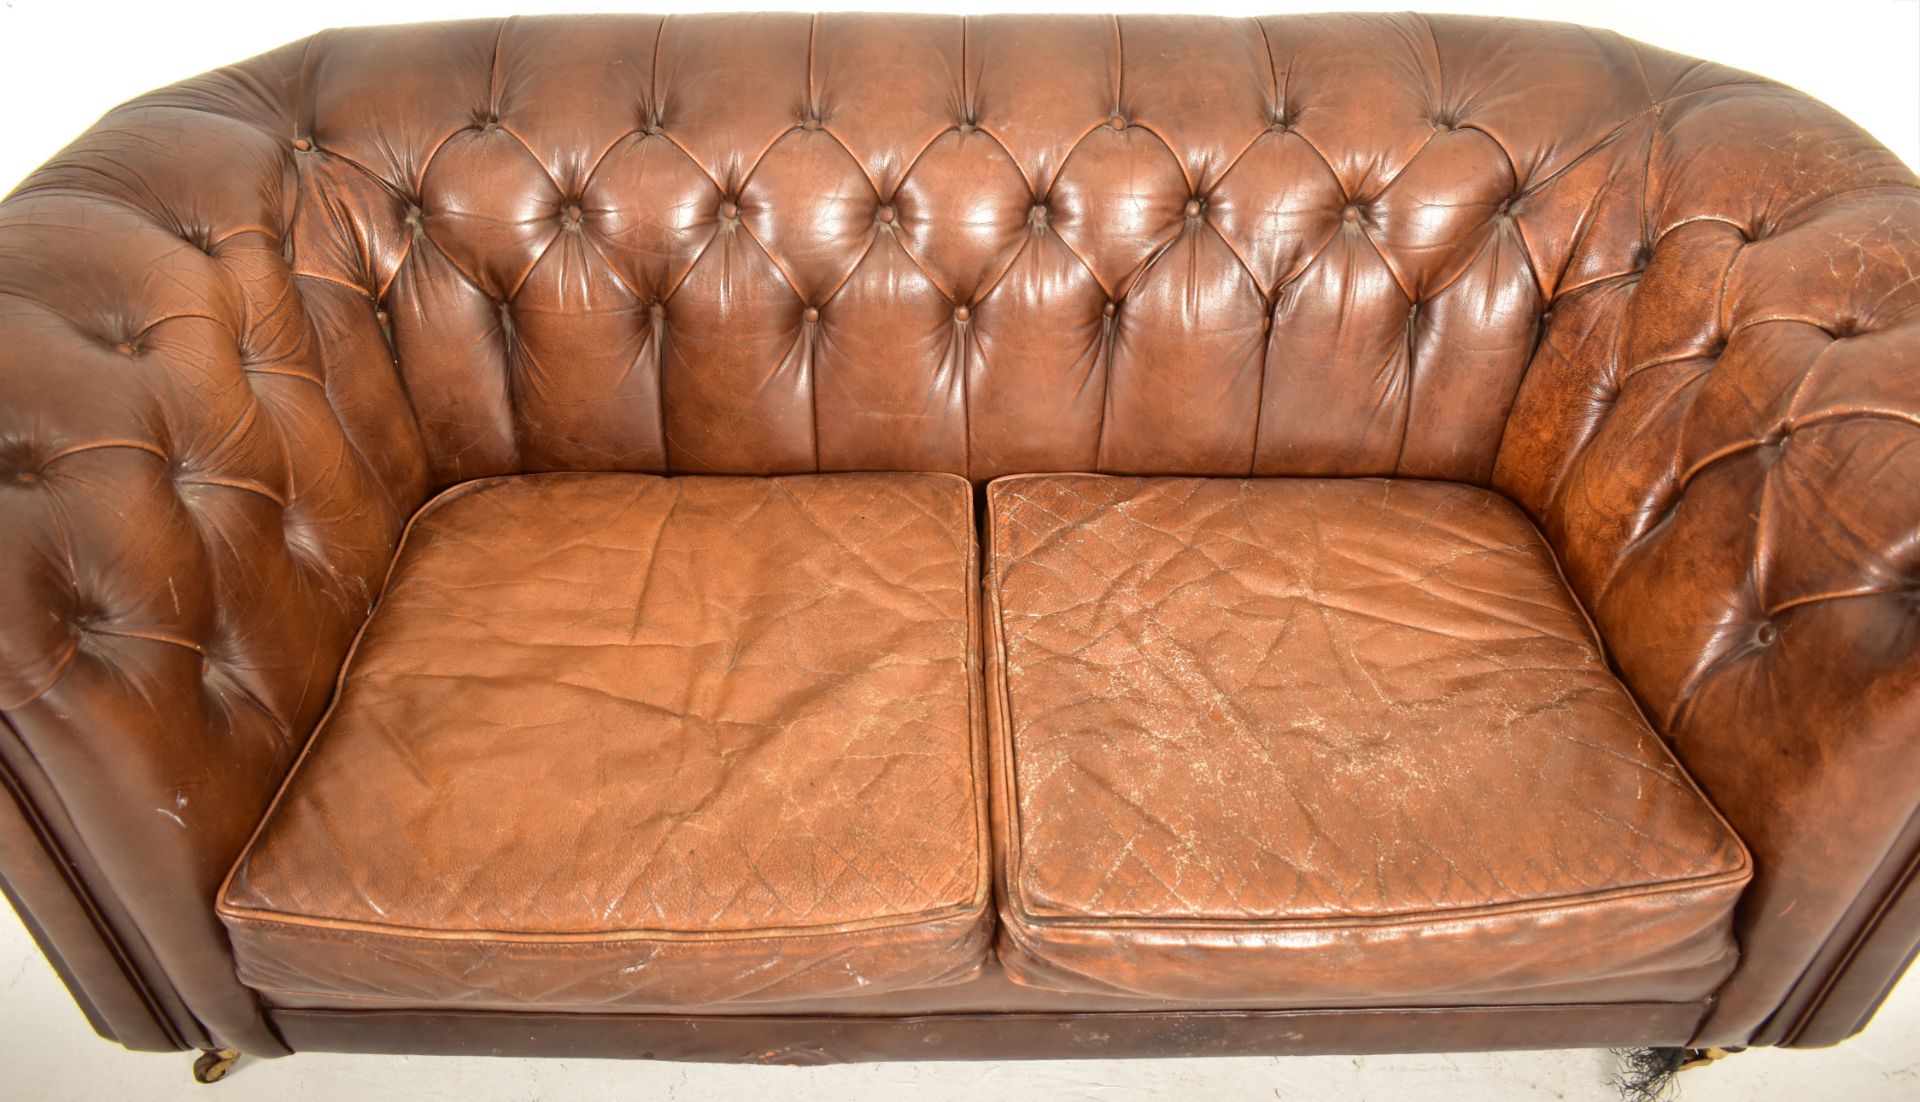 CONTEMPORARY BROWN LEATHER CHESTERFIELD SOFA - Image 2 of 7